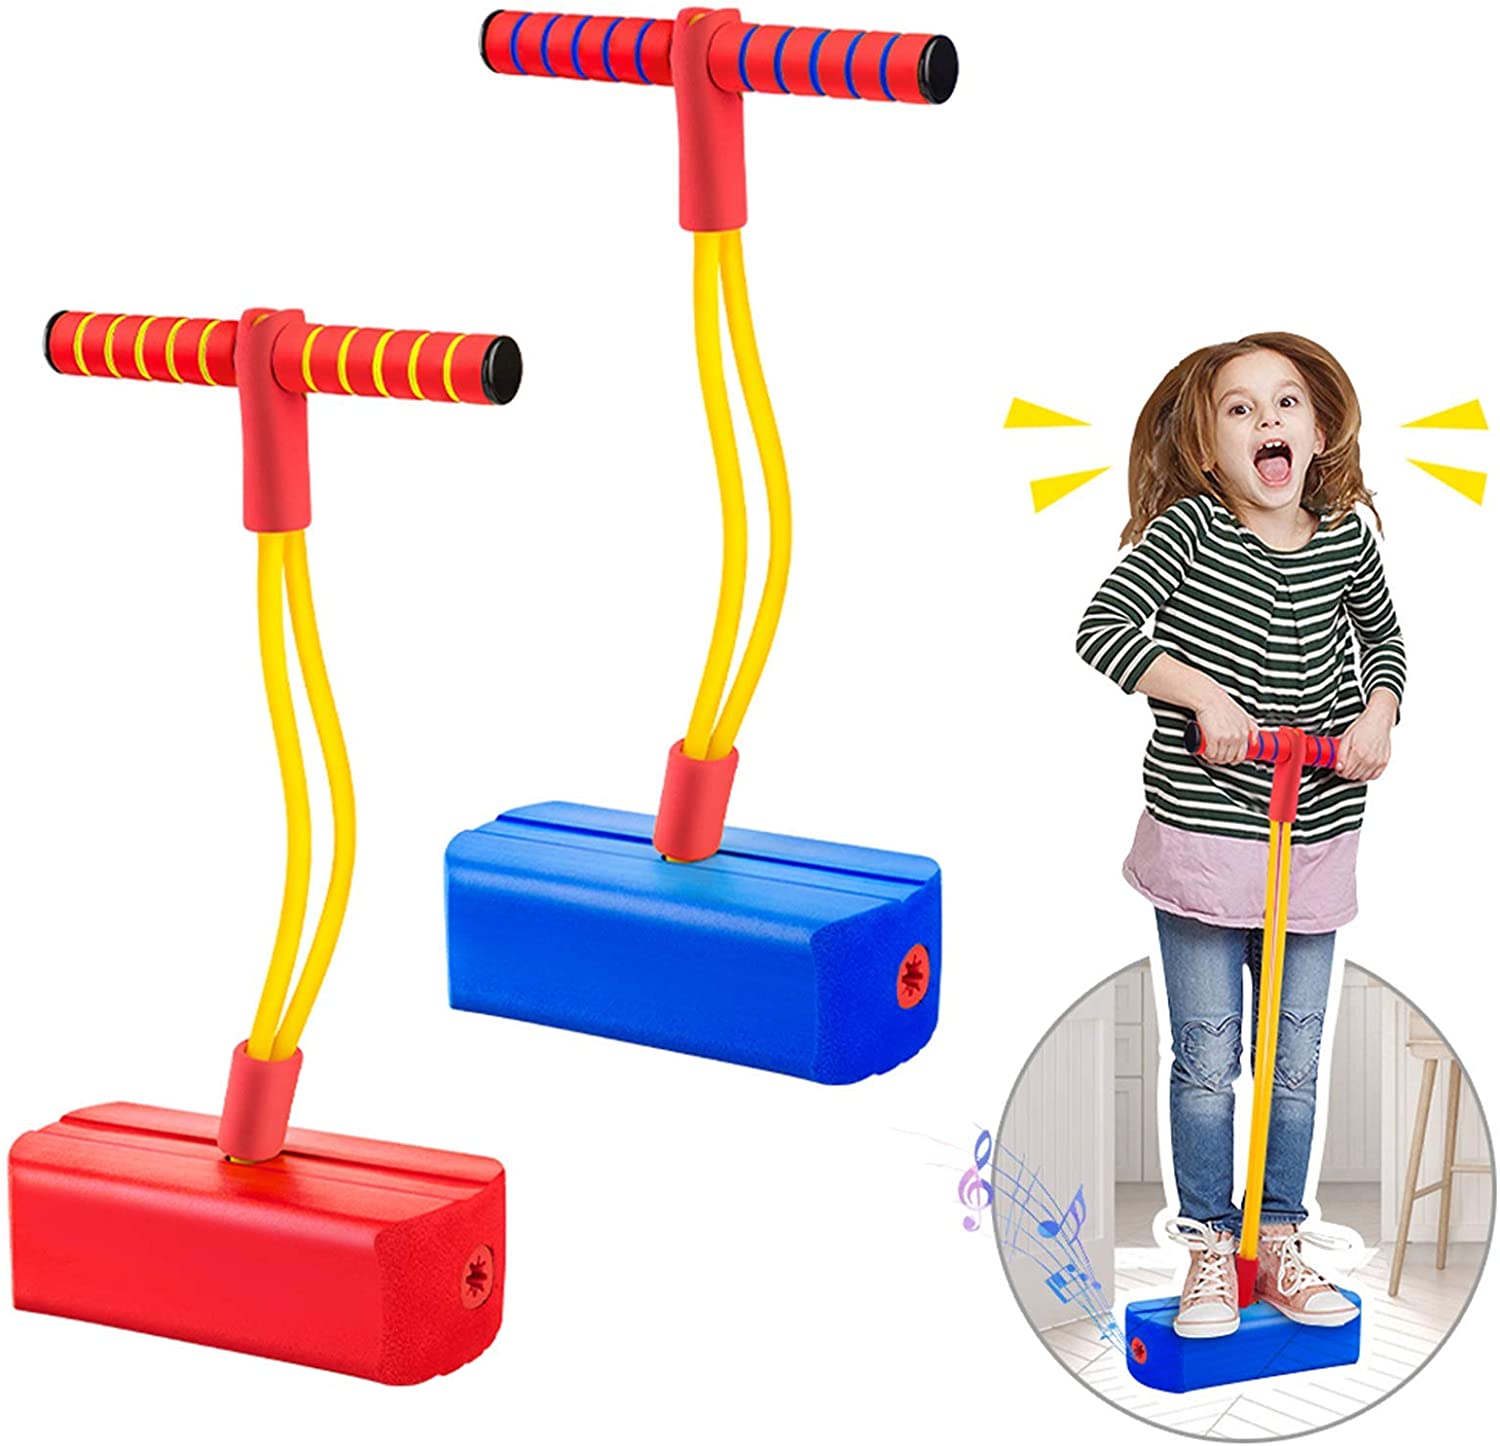 Gifts for 3-12 Year Old Boys Girls, Foam Pogo Jumper for Kids Outdoor Toys for Kids Ages 3-12 Pogo Stick Girls Toys Fun Toys for Autistic Pogo Jumper Birthday Gifts Easter Basket Stuffers, Pink